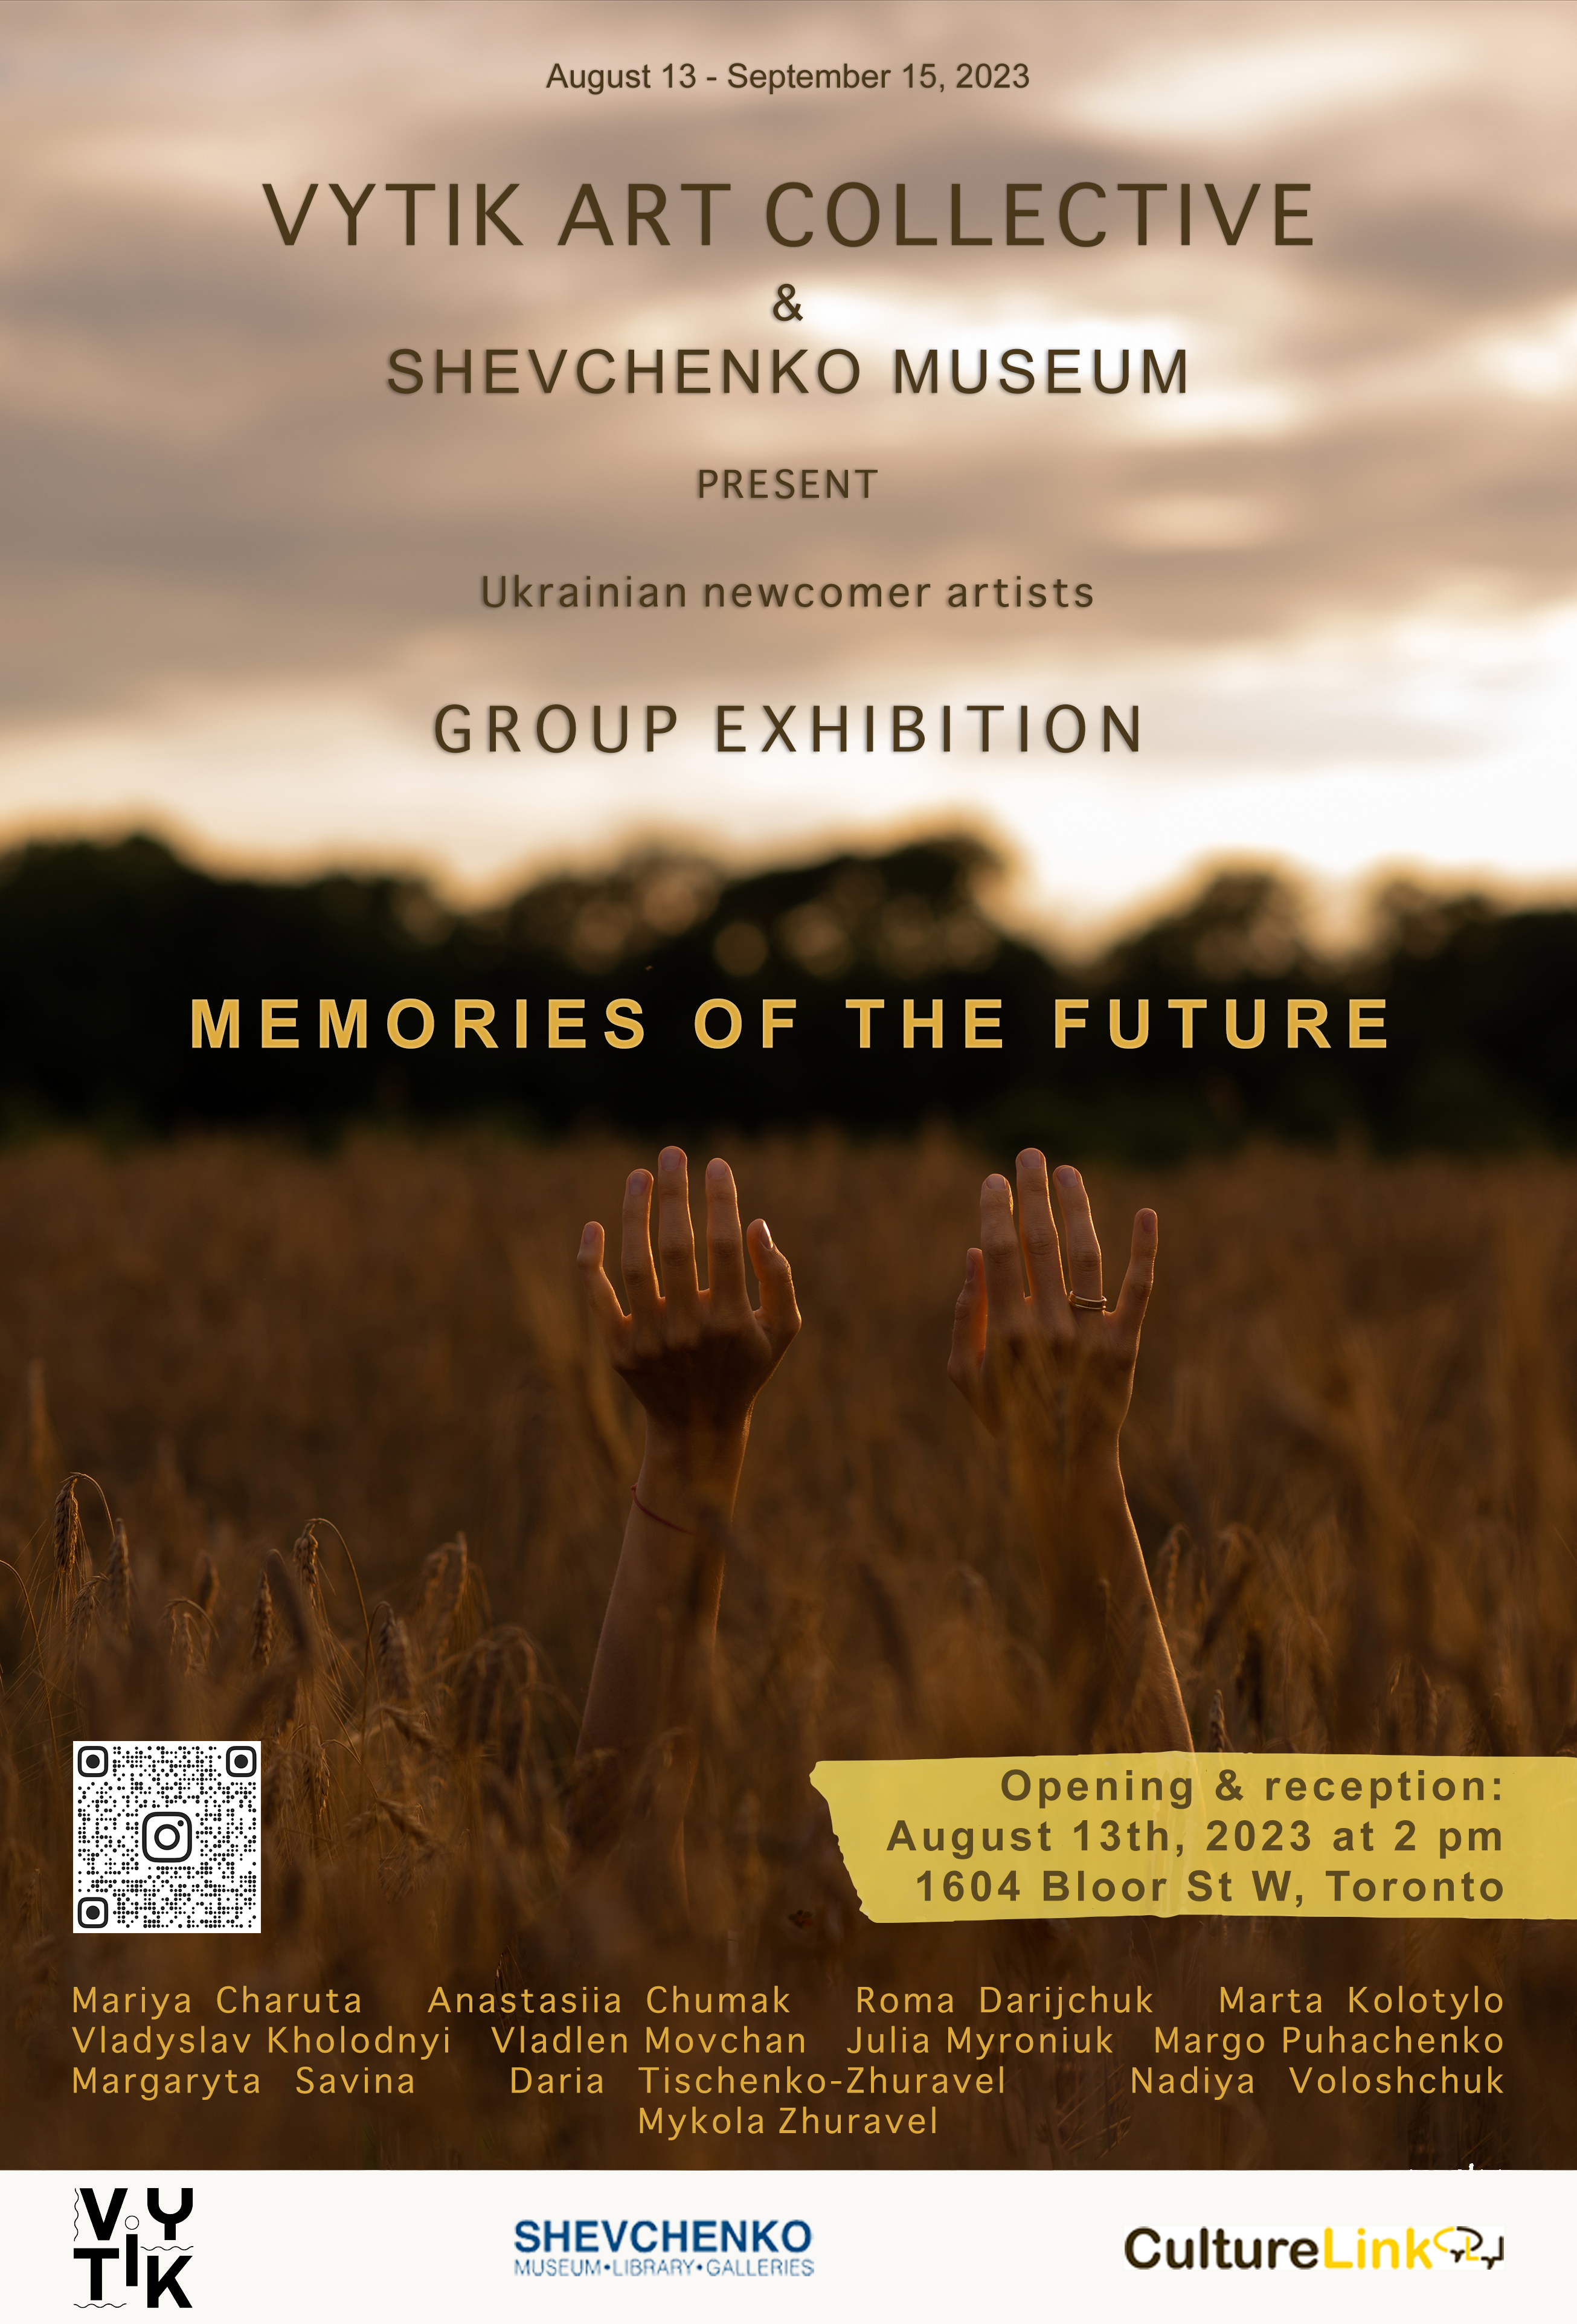 Memories of the Future Exhibition, August 13 - September 15, 2023